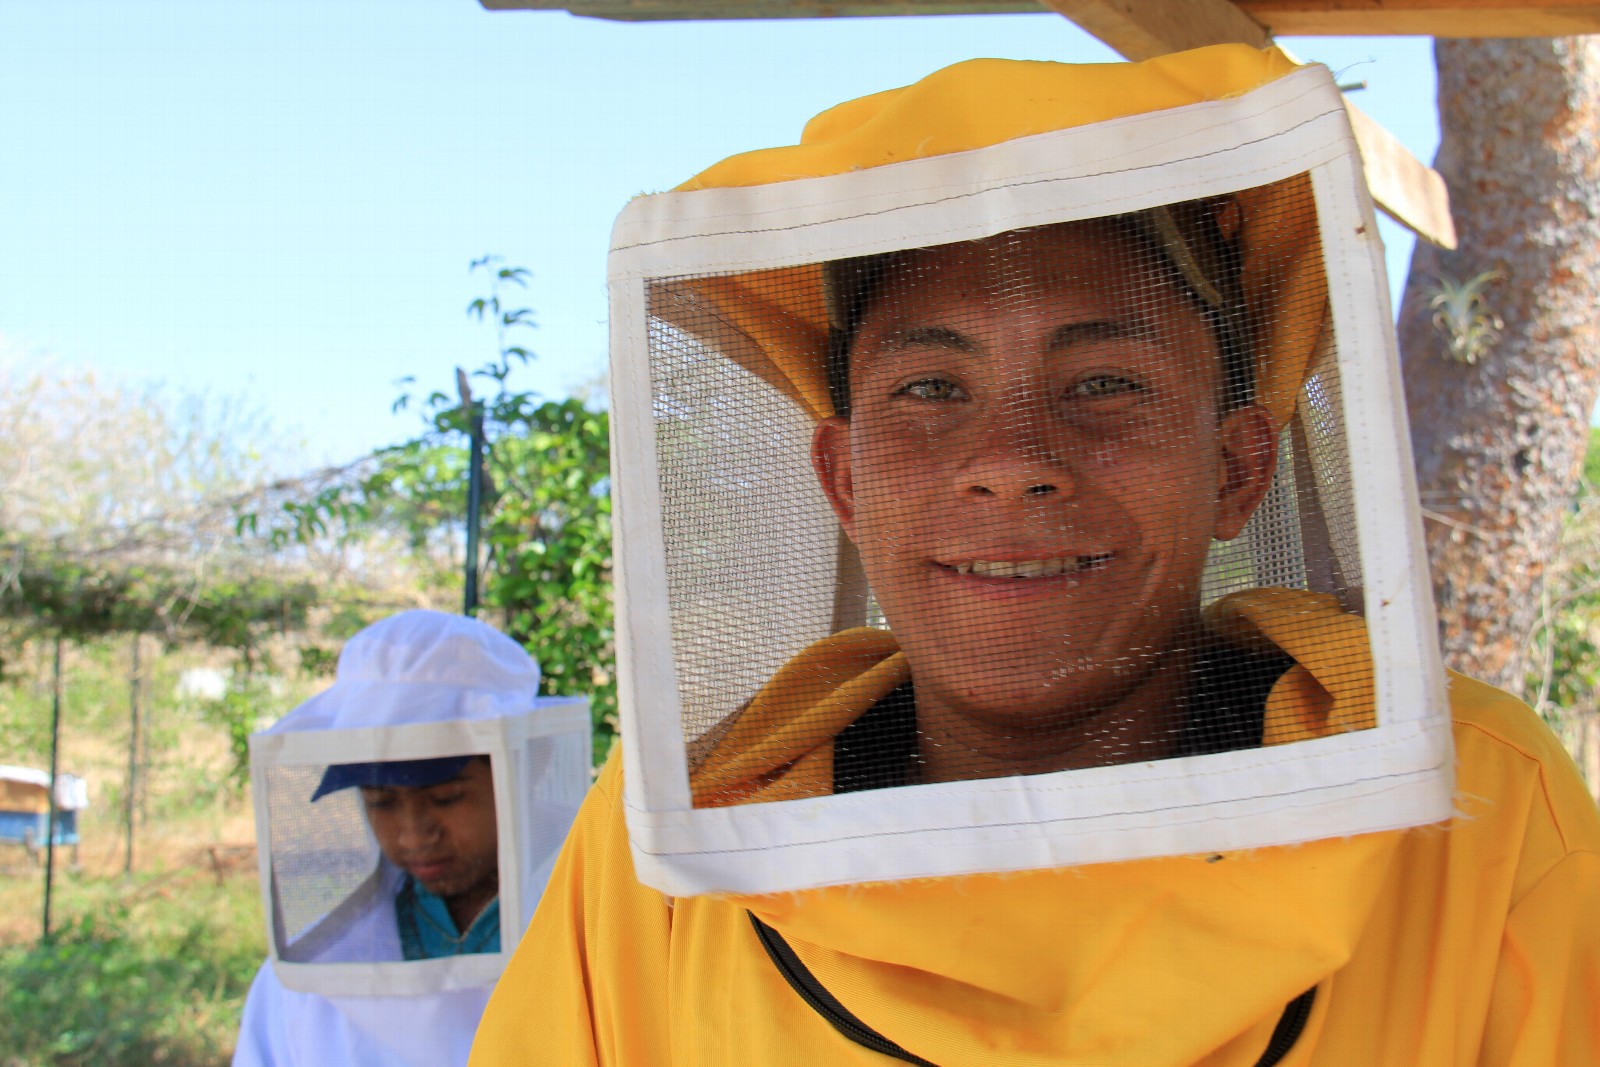 In the yellow suit, Ever Antonio Rios is a 17-year-old high school student from a low-income family in rural area of Somoto, Nicaragua. In his last year of high school, he graduated from CRS YouthBuild - an entrepreneurial and vocational training program - in beekeeping and entrepreneurship.   He created a business plan for his beekeeping business and now has 18 beehives.  He supports his family with the earnings from the honey, and teaches other YouthBuild youth about beekeeping.   